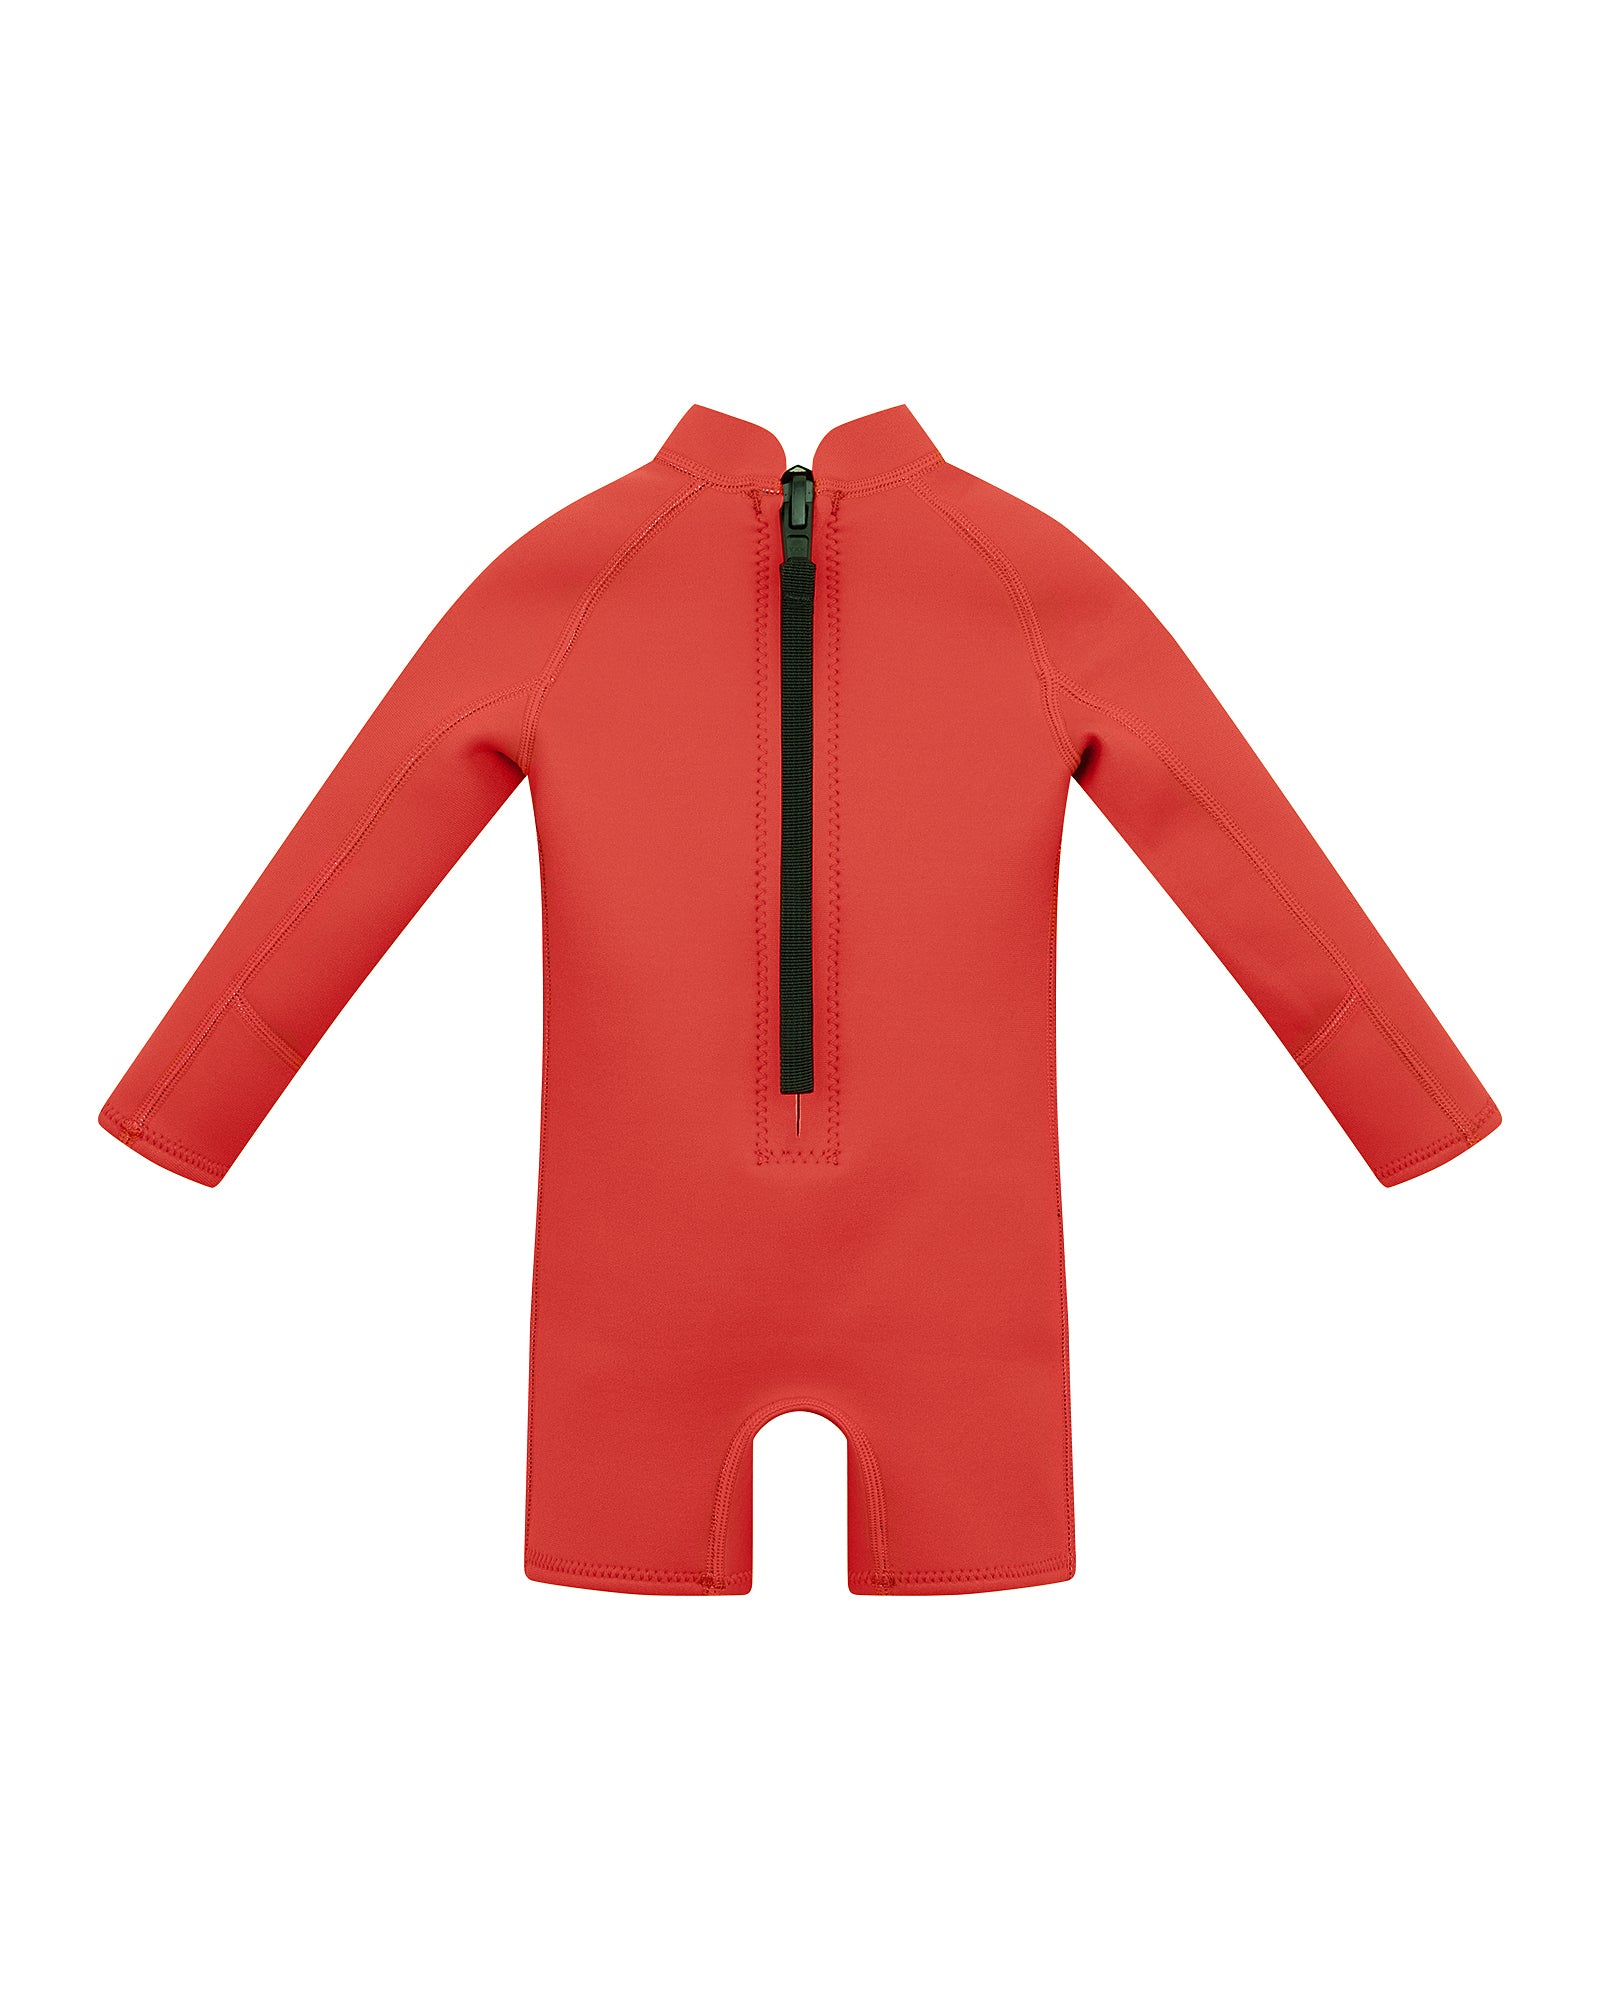 Springsuit Wetsuit – Chilli (Re-Stock Arriving March)